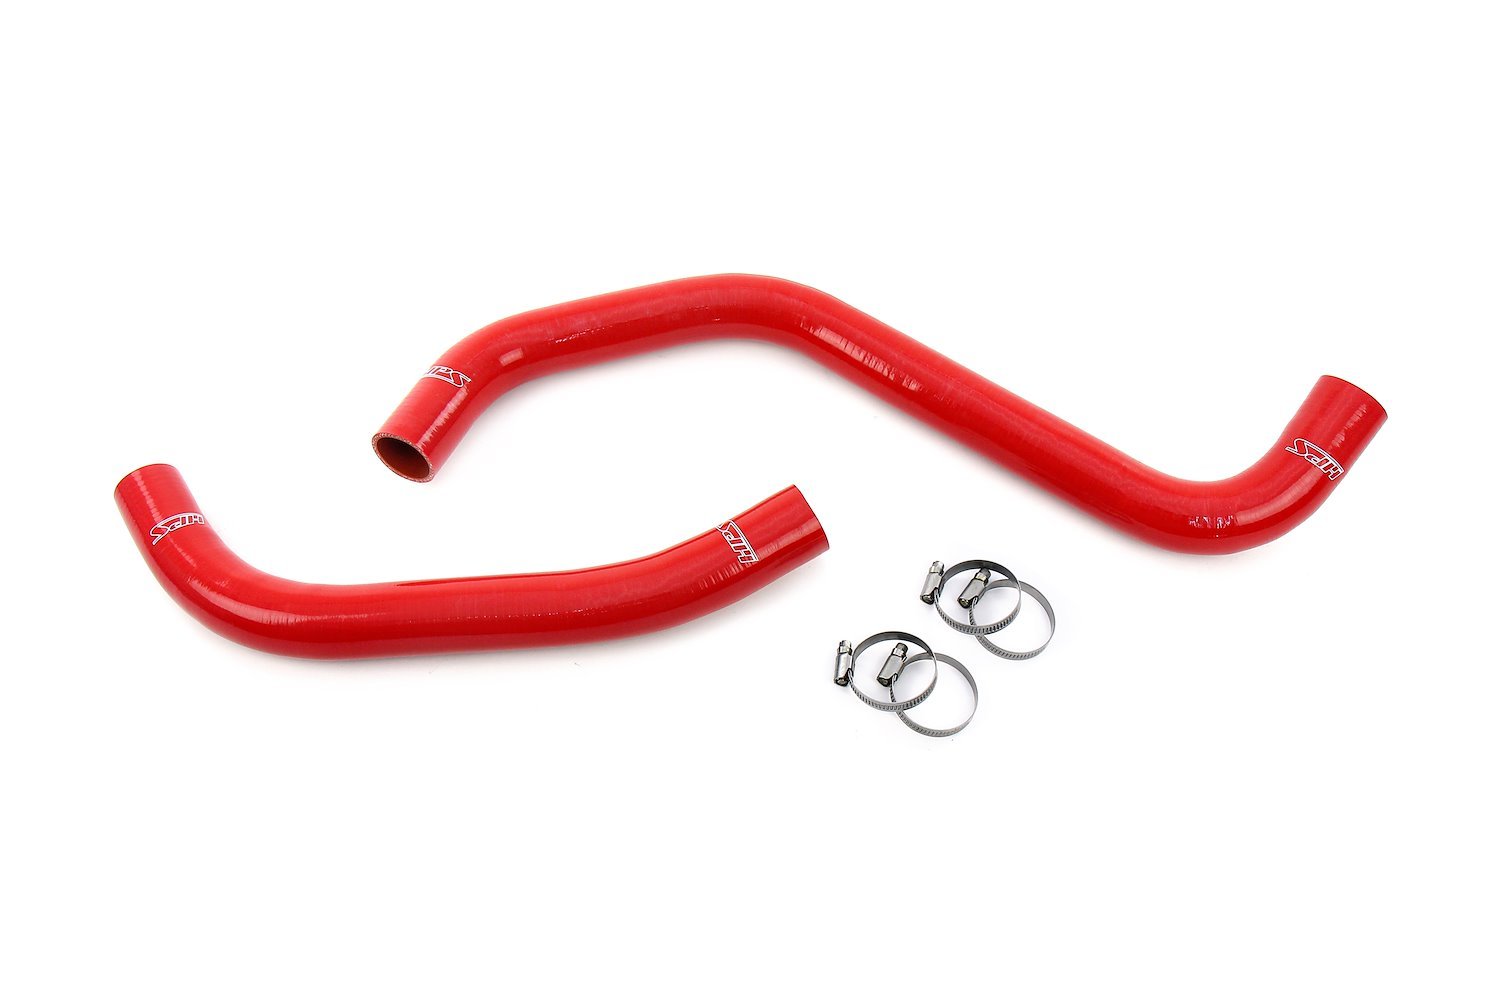 57-2128-RED Radiator Hose Kit, 3-Ply Reinforced Silicone, Replaces Rubber Radiator Coolant Hoses